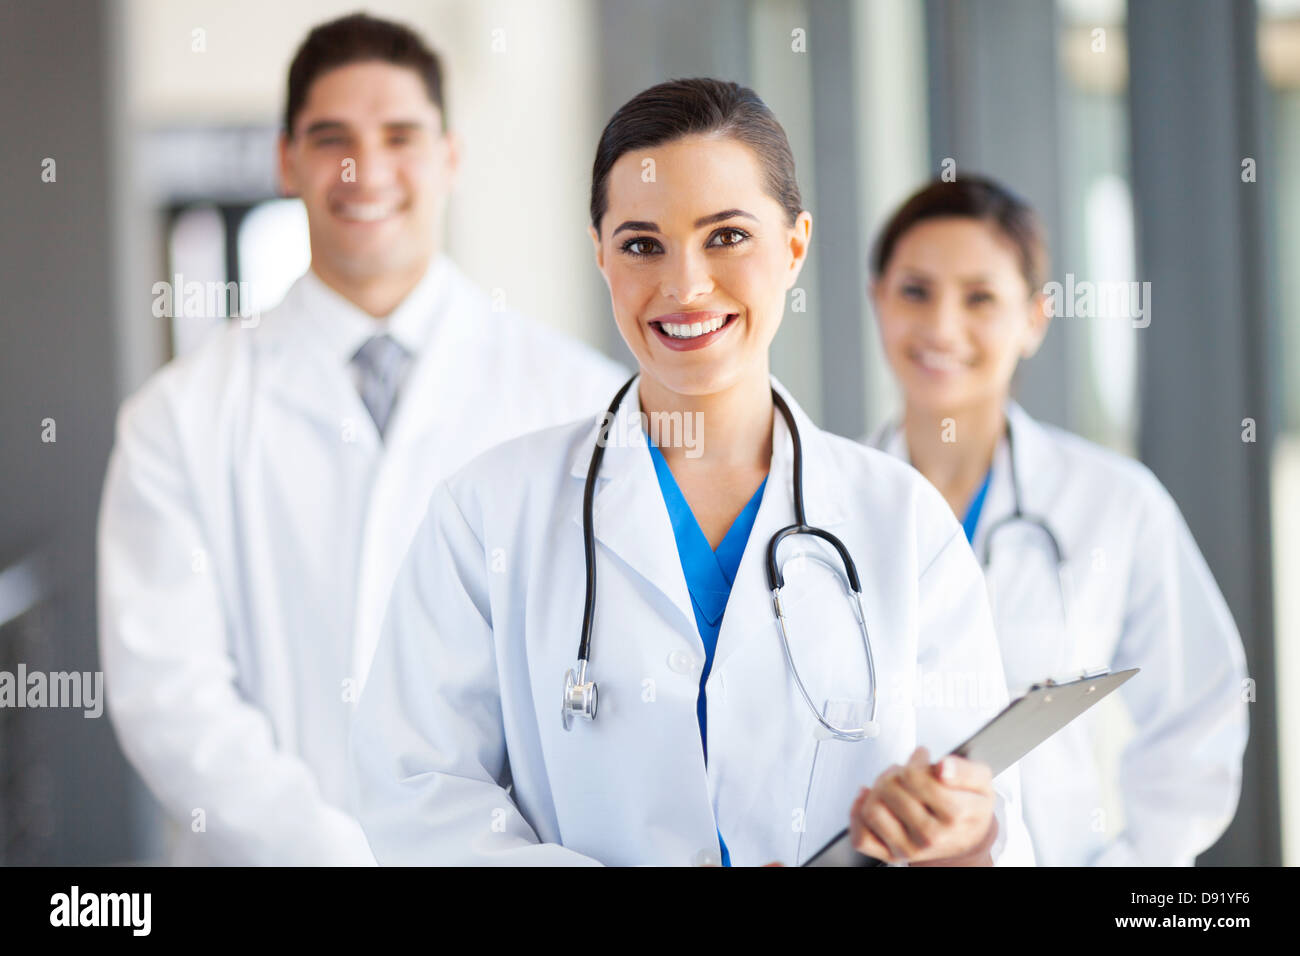 group of medical workers portrait in hospital Stock Photo